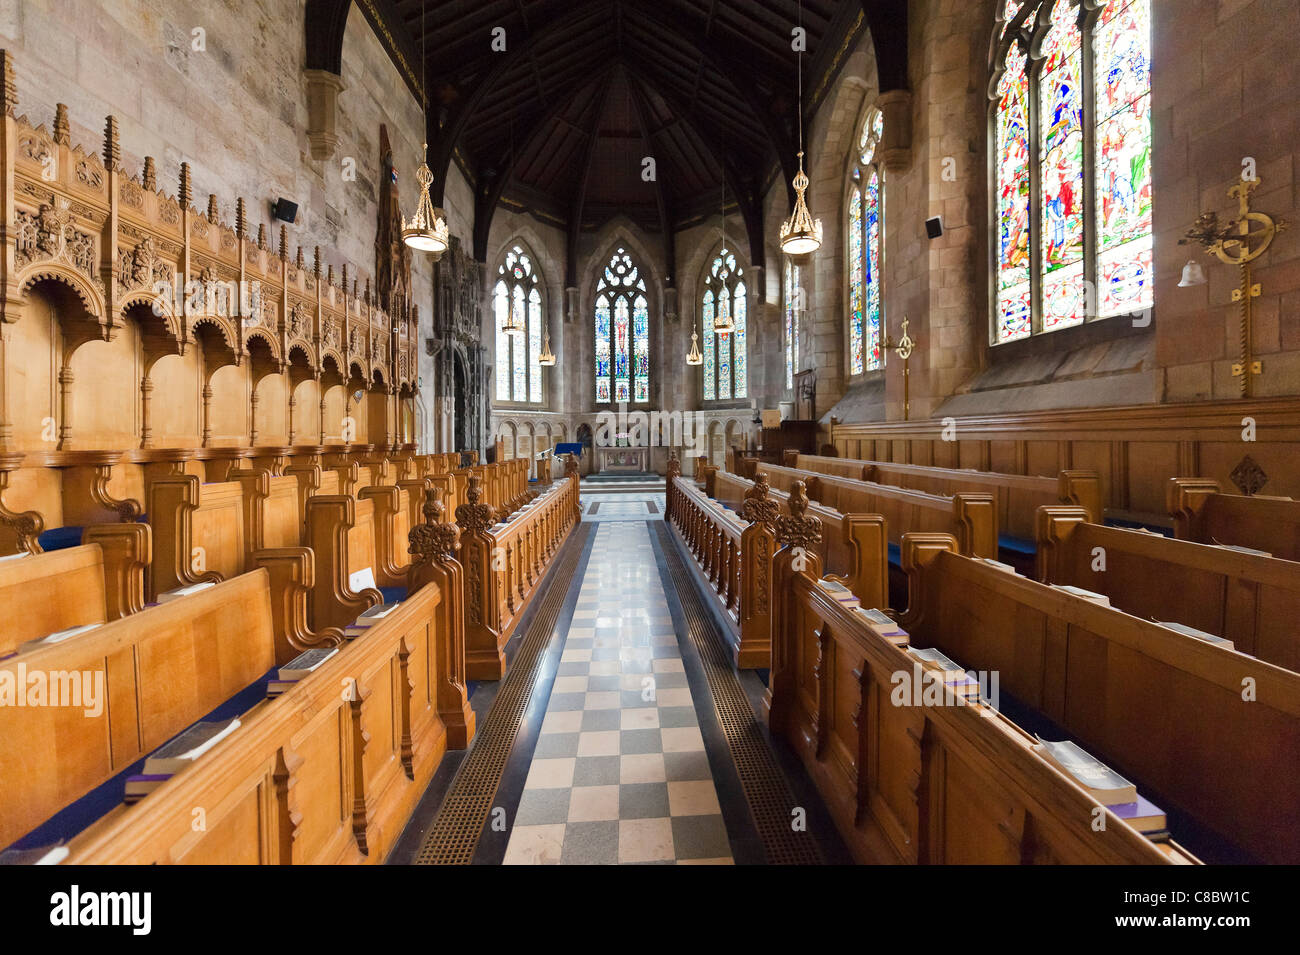 St Salvator's Chapel in the University of St Andrews, St Andrews, Fife, Central Scotland, UK Stock Photo